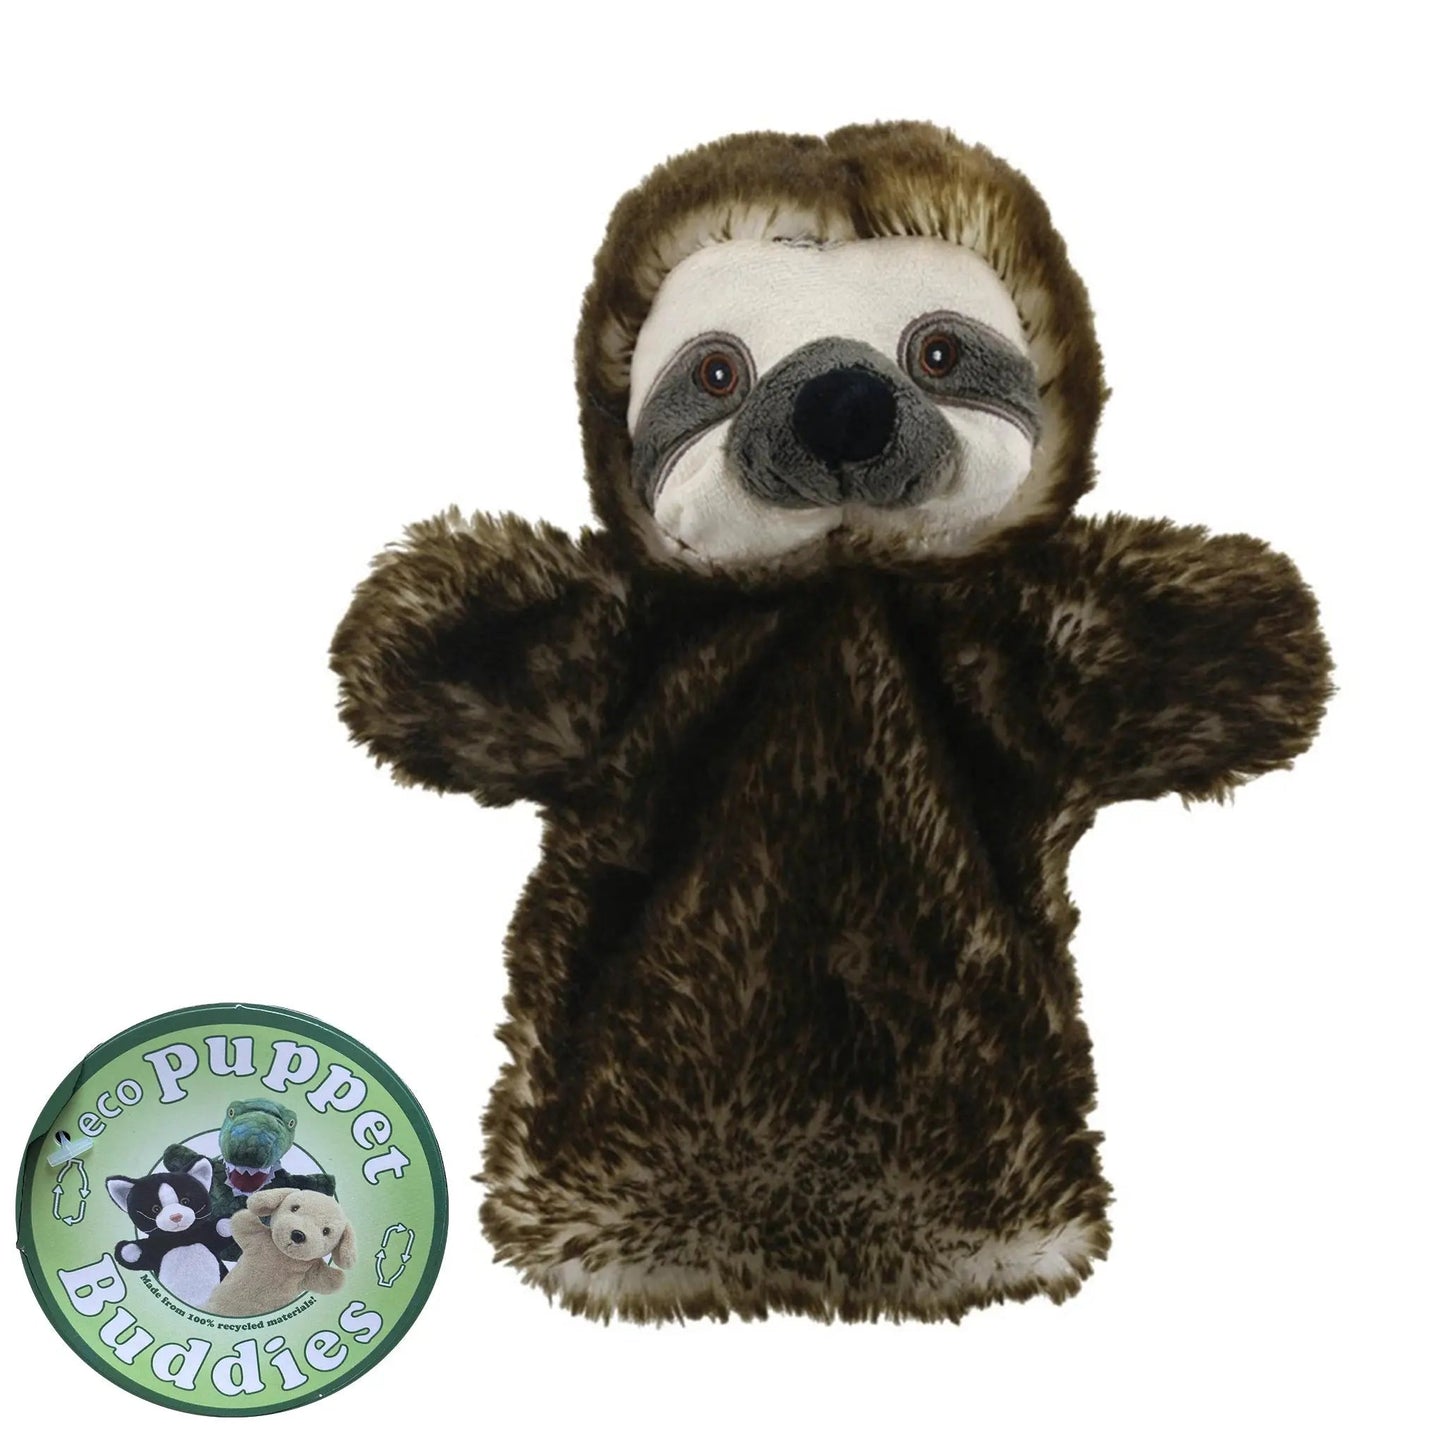 Sloth Eco Puppet Buddies Hand Puppet - The Puppet Company - The Forgotten Toy Shop